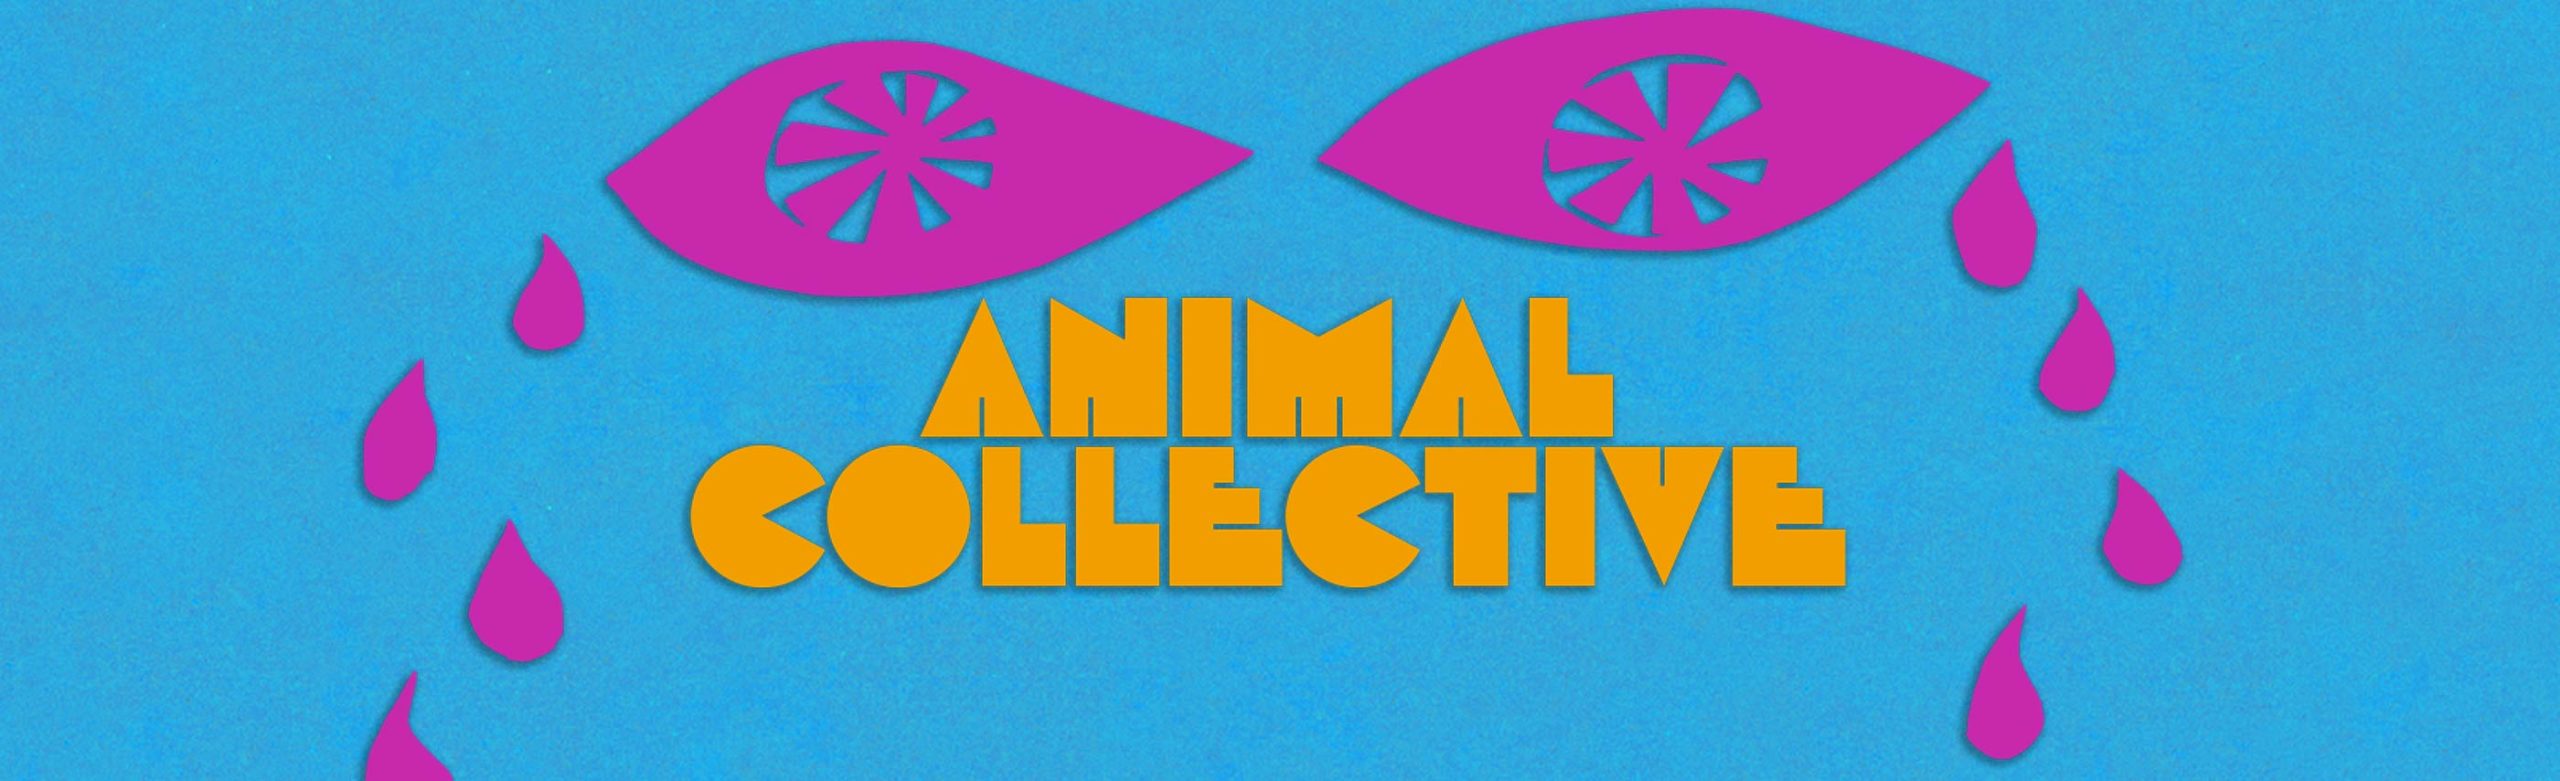 Animal Collective Tickets Giveaway 2022 Image